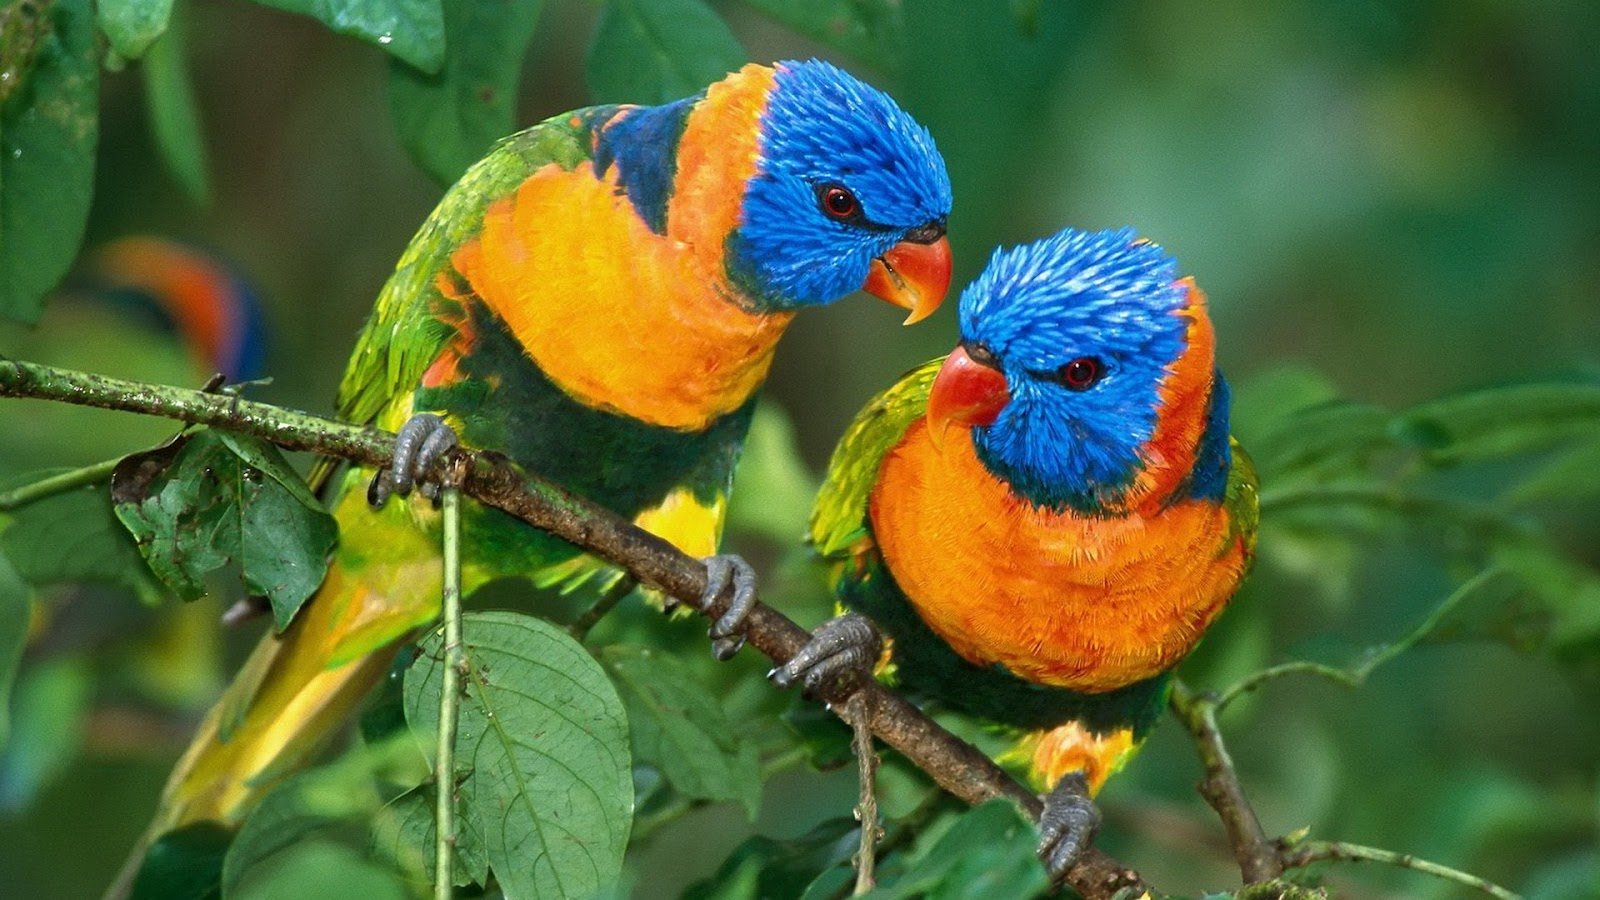 All Wallpapers Parrot Hd Wallpapers 2